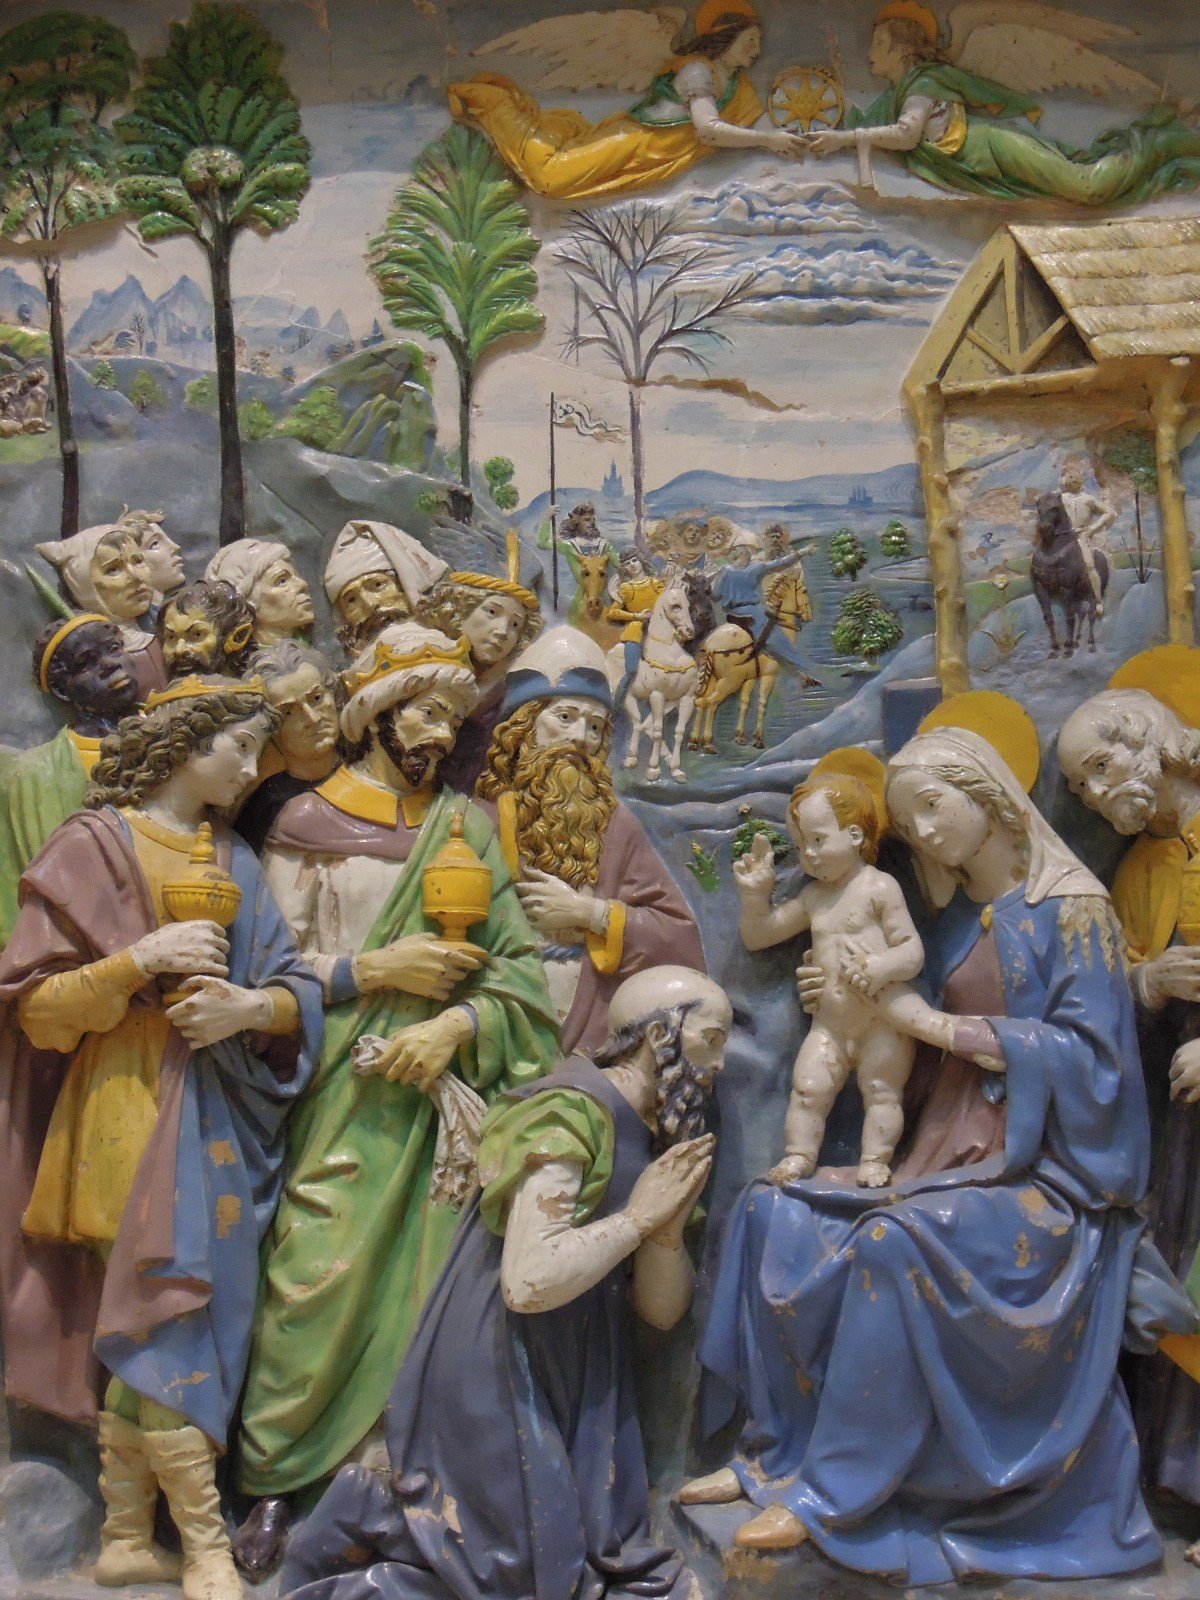 "The adoration of the King", about 1500-10, Enamelled terracotta, Andrea Della Robbia, 1435-1525